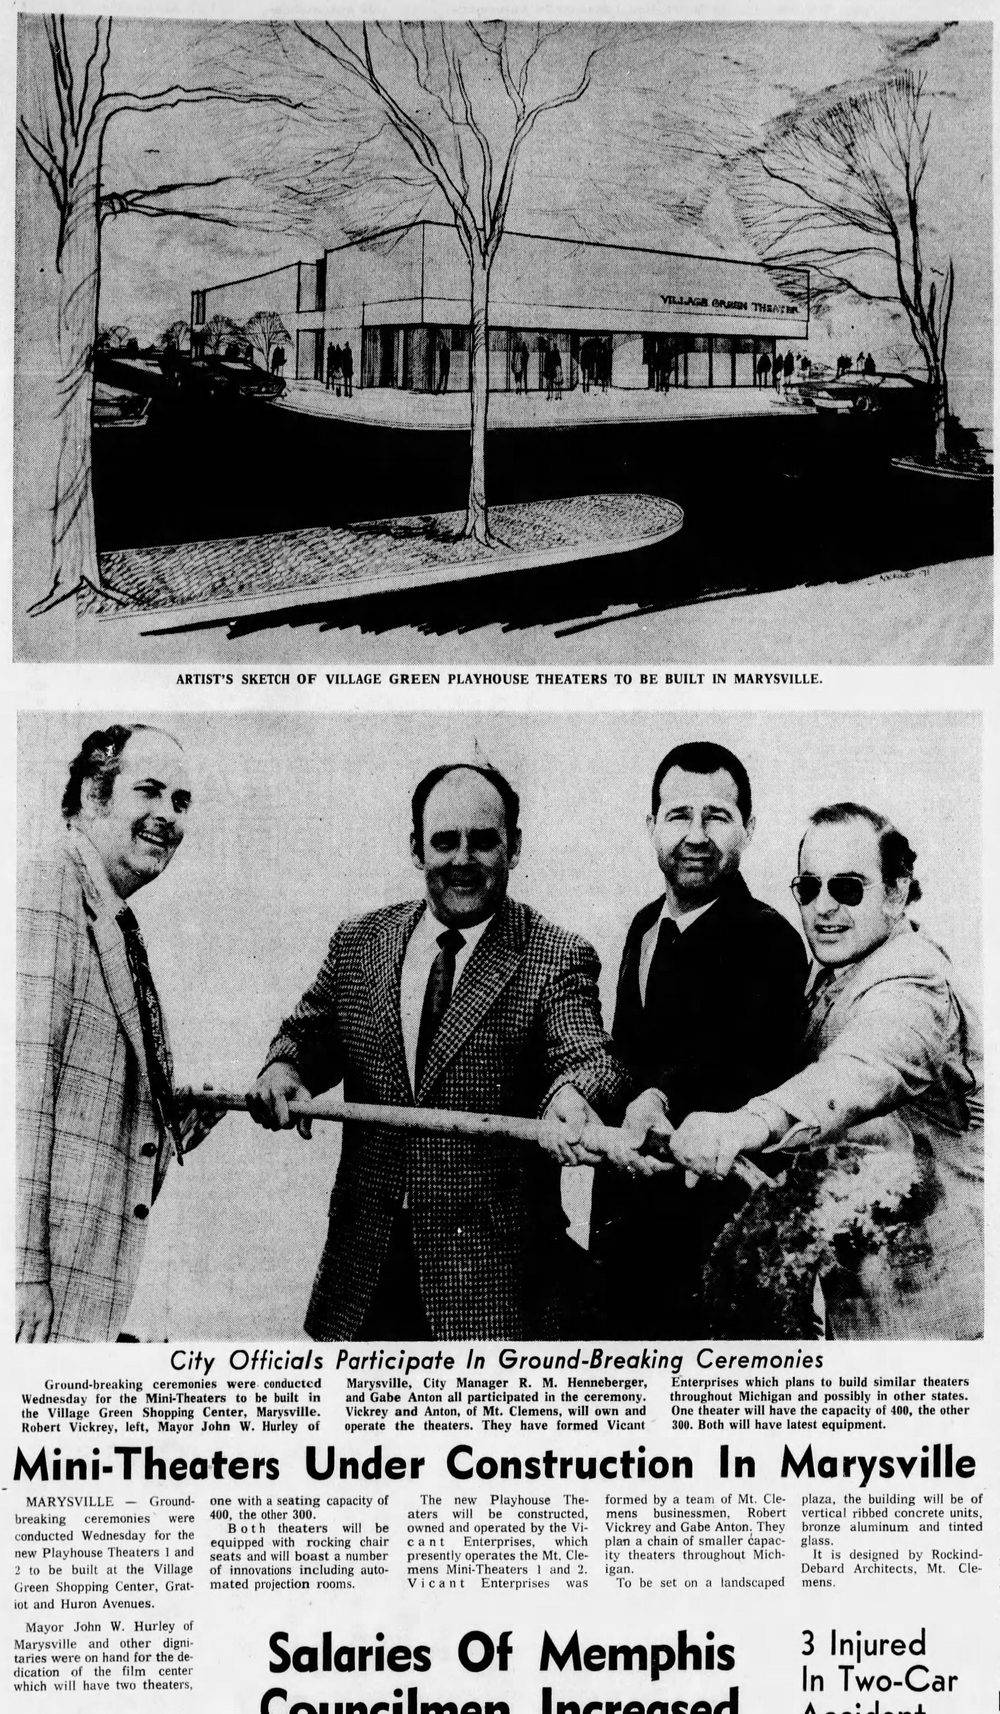 Village Green Theater (Playhouse Theaters) - Oct 1971 Article On Construction